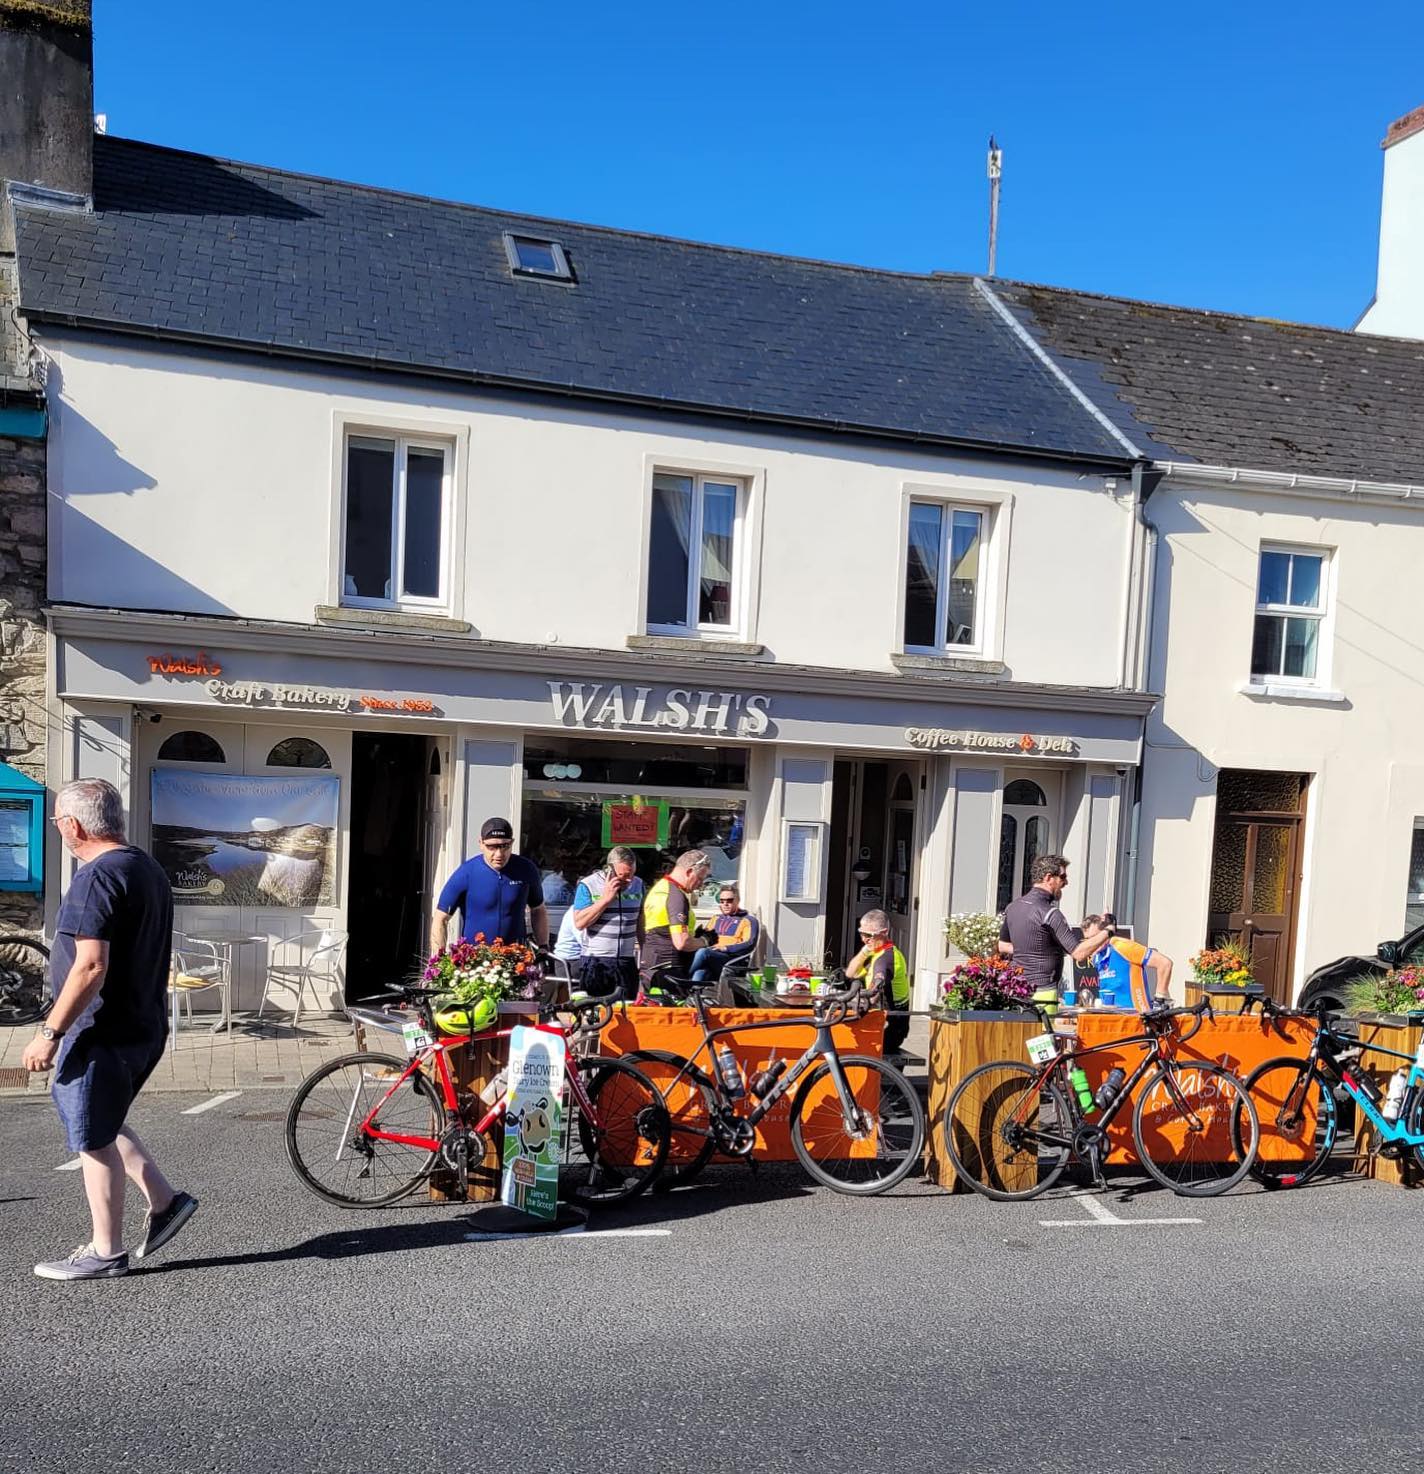 What a weekend ☀️ Pop by for some lunch, pastries and coffee to keep you fueled to enjoy the sunshine! 

Saturday: 8.30 - 5.30
Sunday: 9.30 - 5

#connemara #tourdeconnemara #bakery #clifden #wildatlanticway